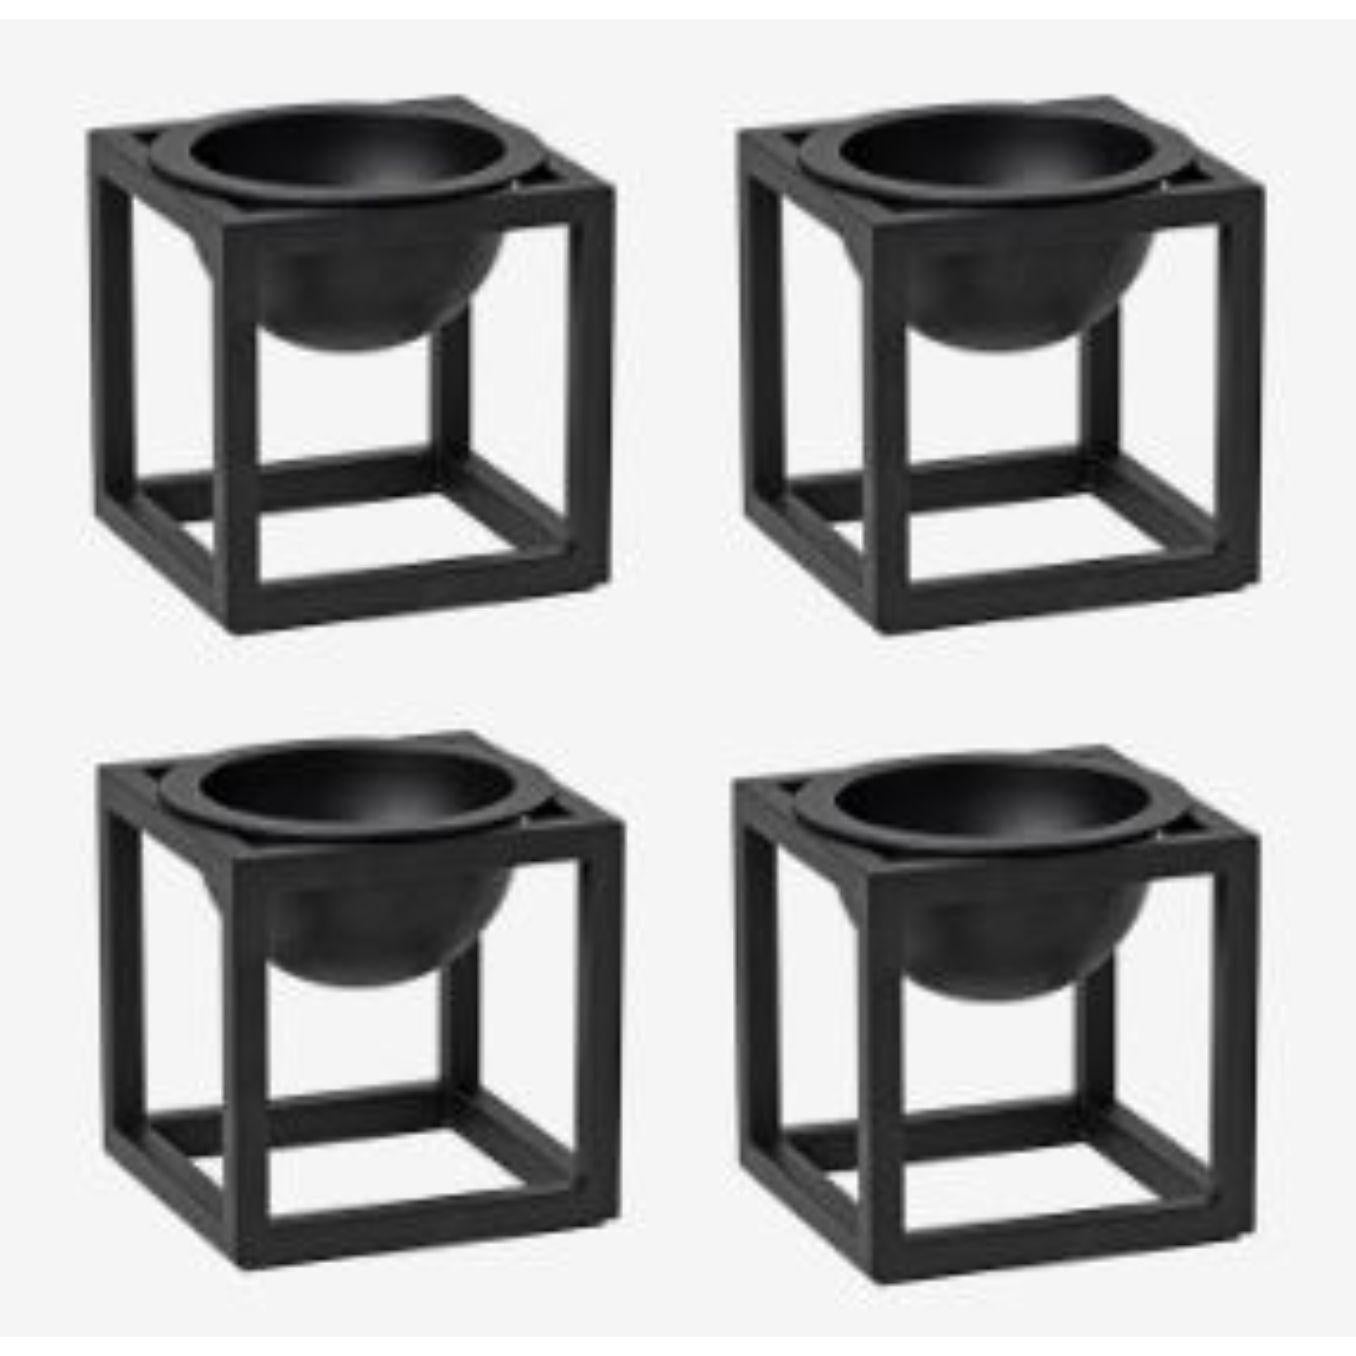 Set of 4 black Mini Kubus bowls by Lassen
Dimensions: D 7 x W 7 x H 7 cm 
Materials: Metal 
Weight: 0.40 Kg

Kubus bowl is based on original sketches by Mogens Lassen, and contains elements from Bauhaus, which Mogens Lassen took inspiration